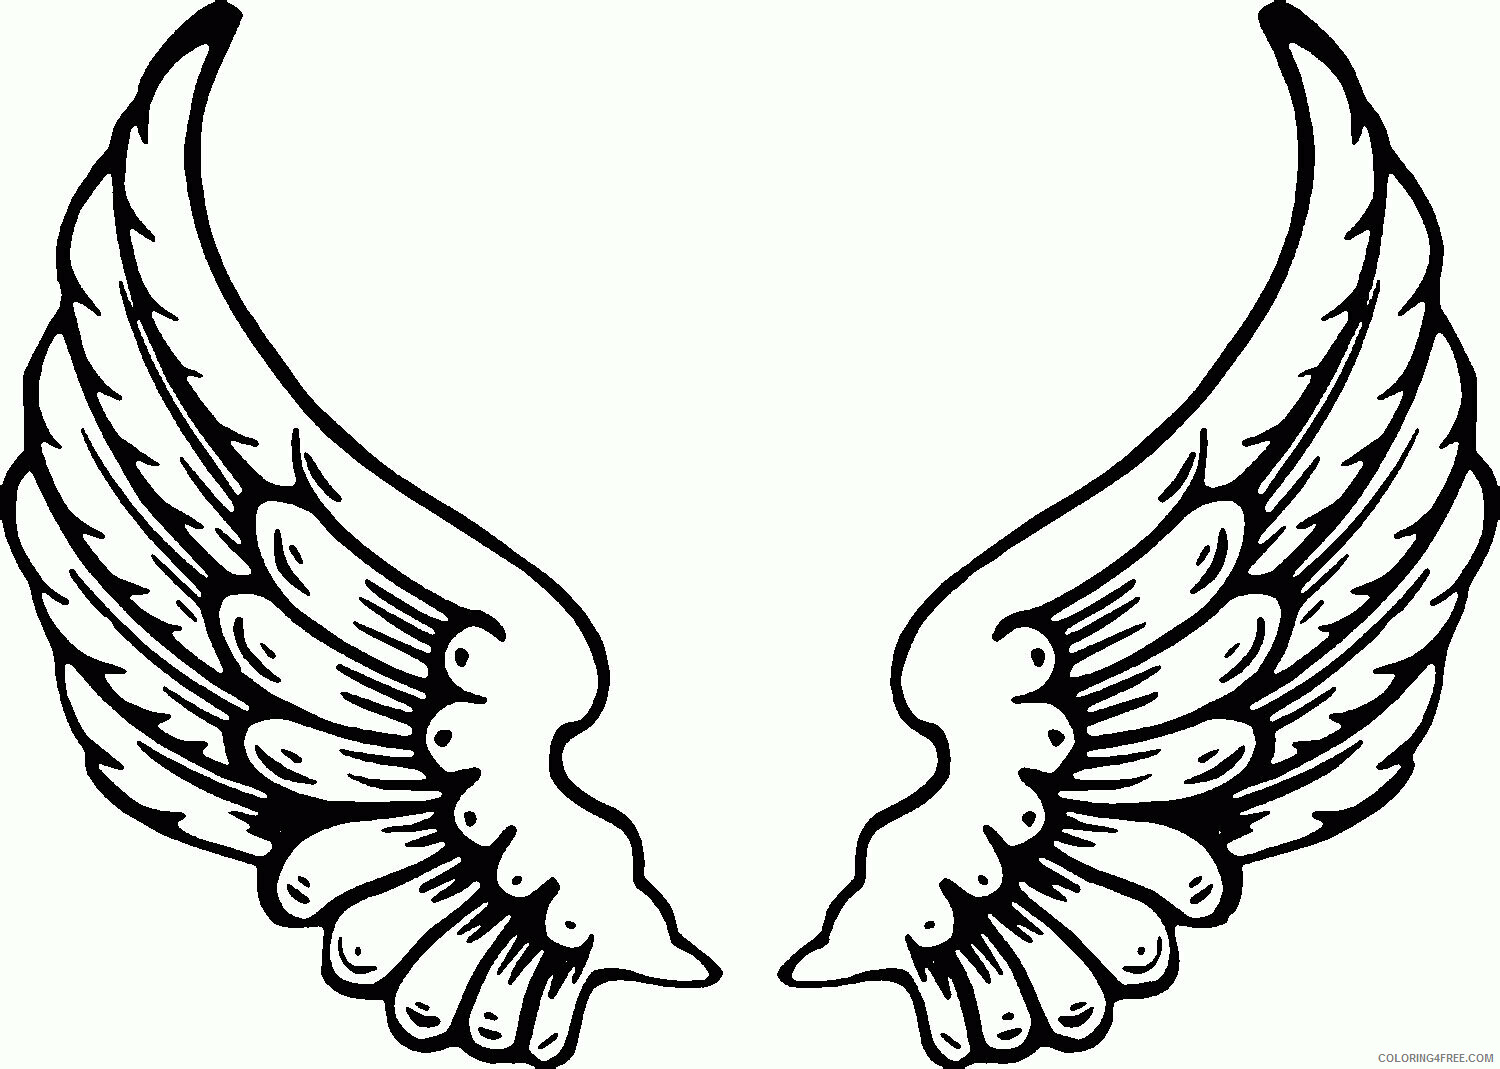 Angel Wings Coloring Pages to Print Printable Sheets Free Printable Angel Pages 2021 a 6106 Coloring4free